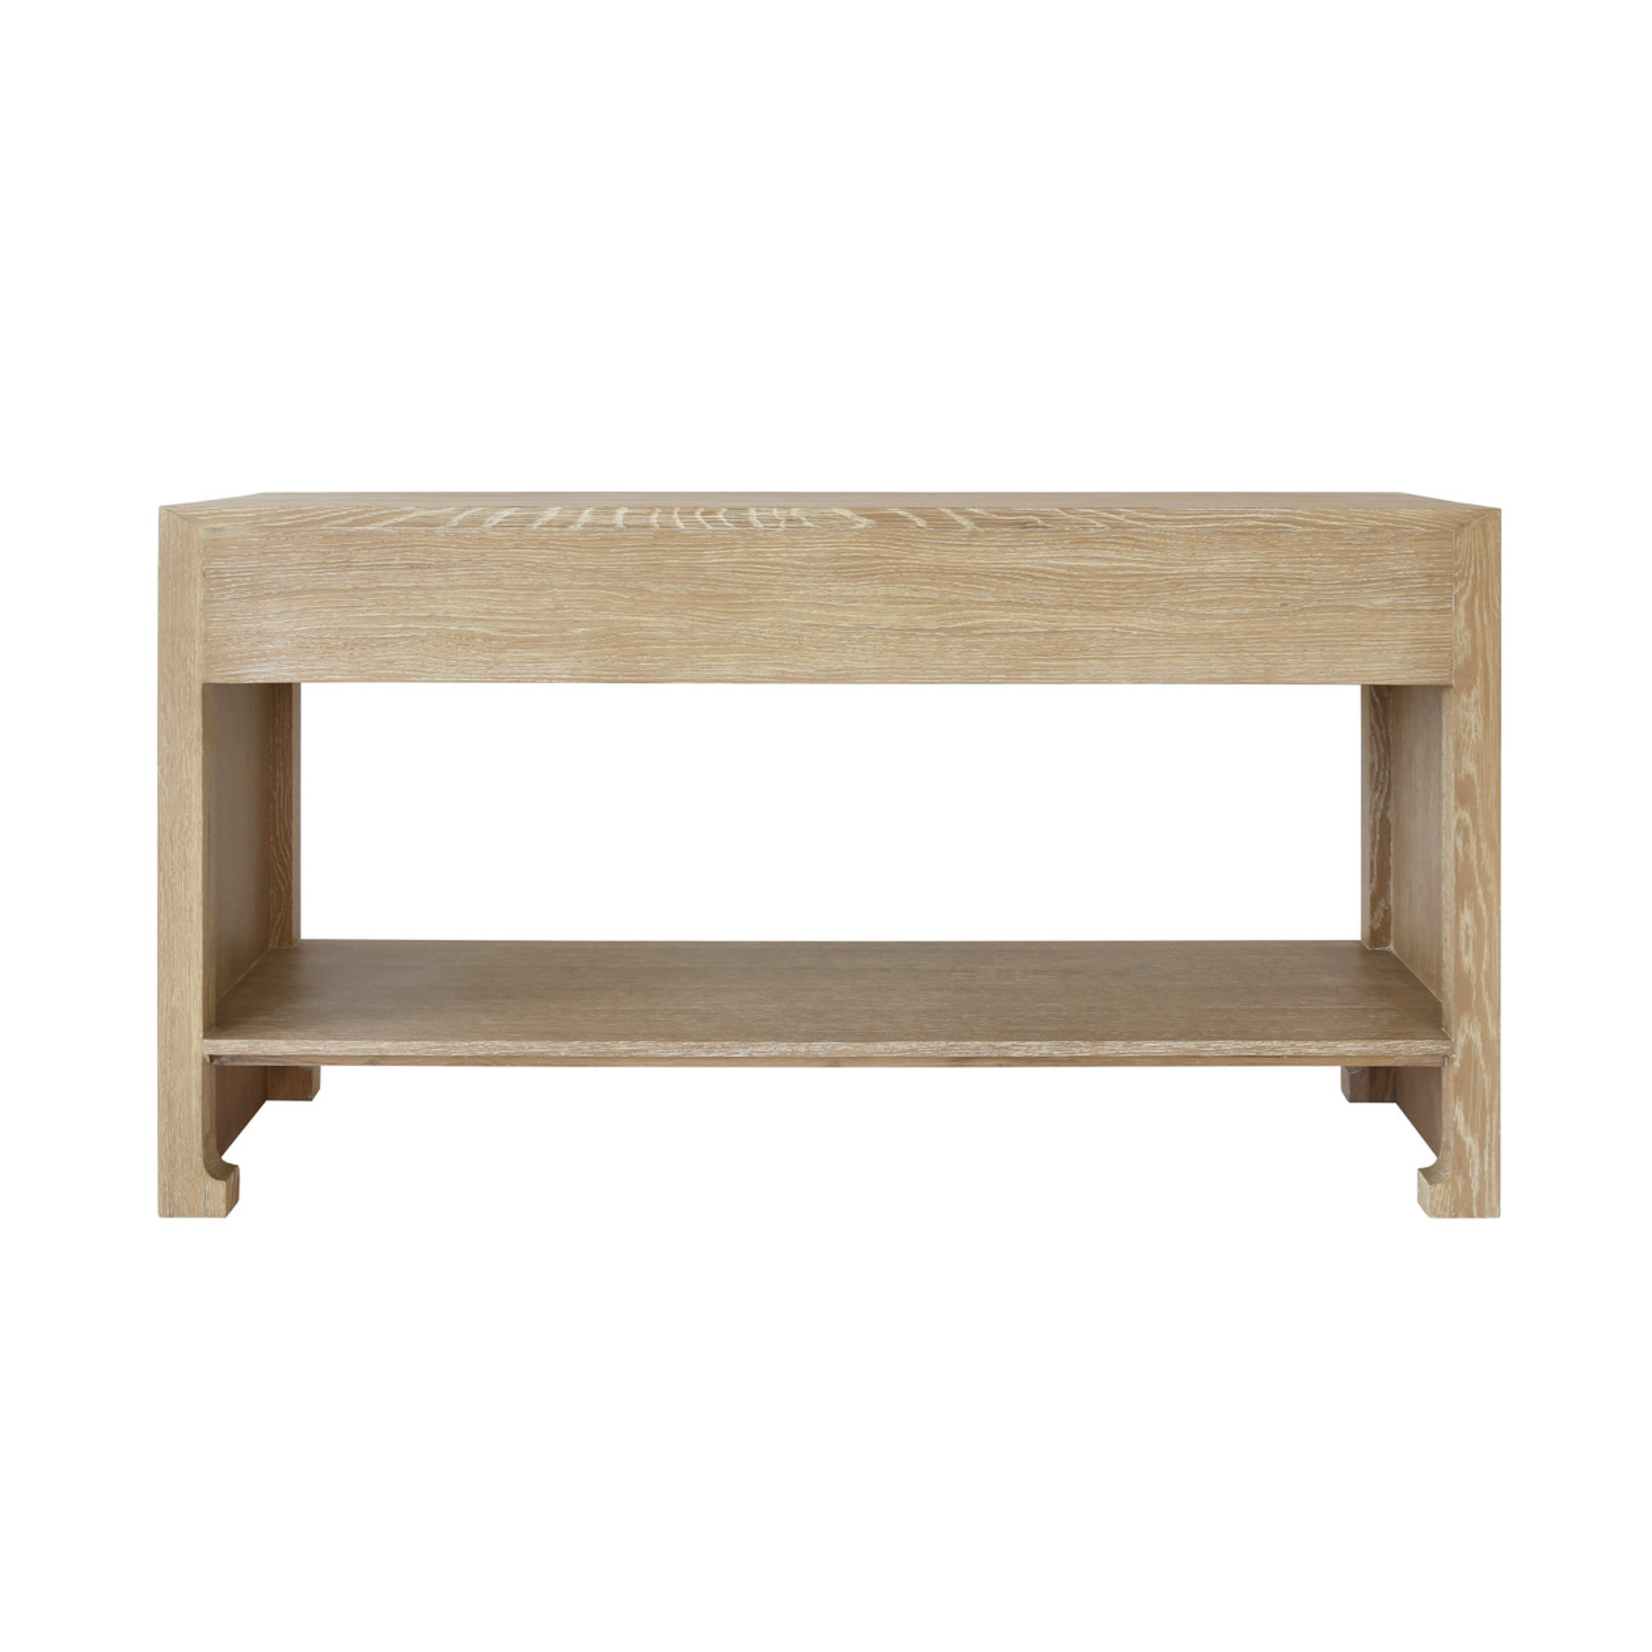 Outside The Box 58x18x32 Worlds Away Rosalind Natural Cerused Oak & Cane 3 Drawer Console